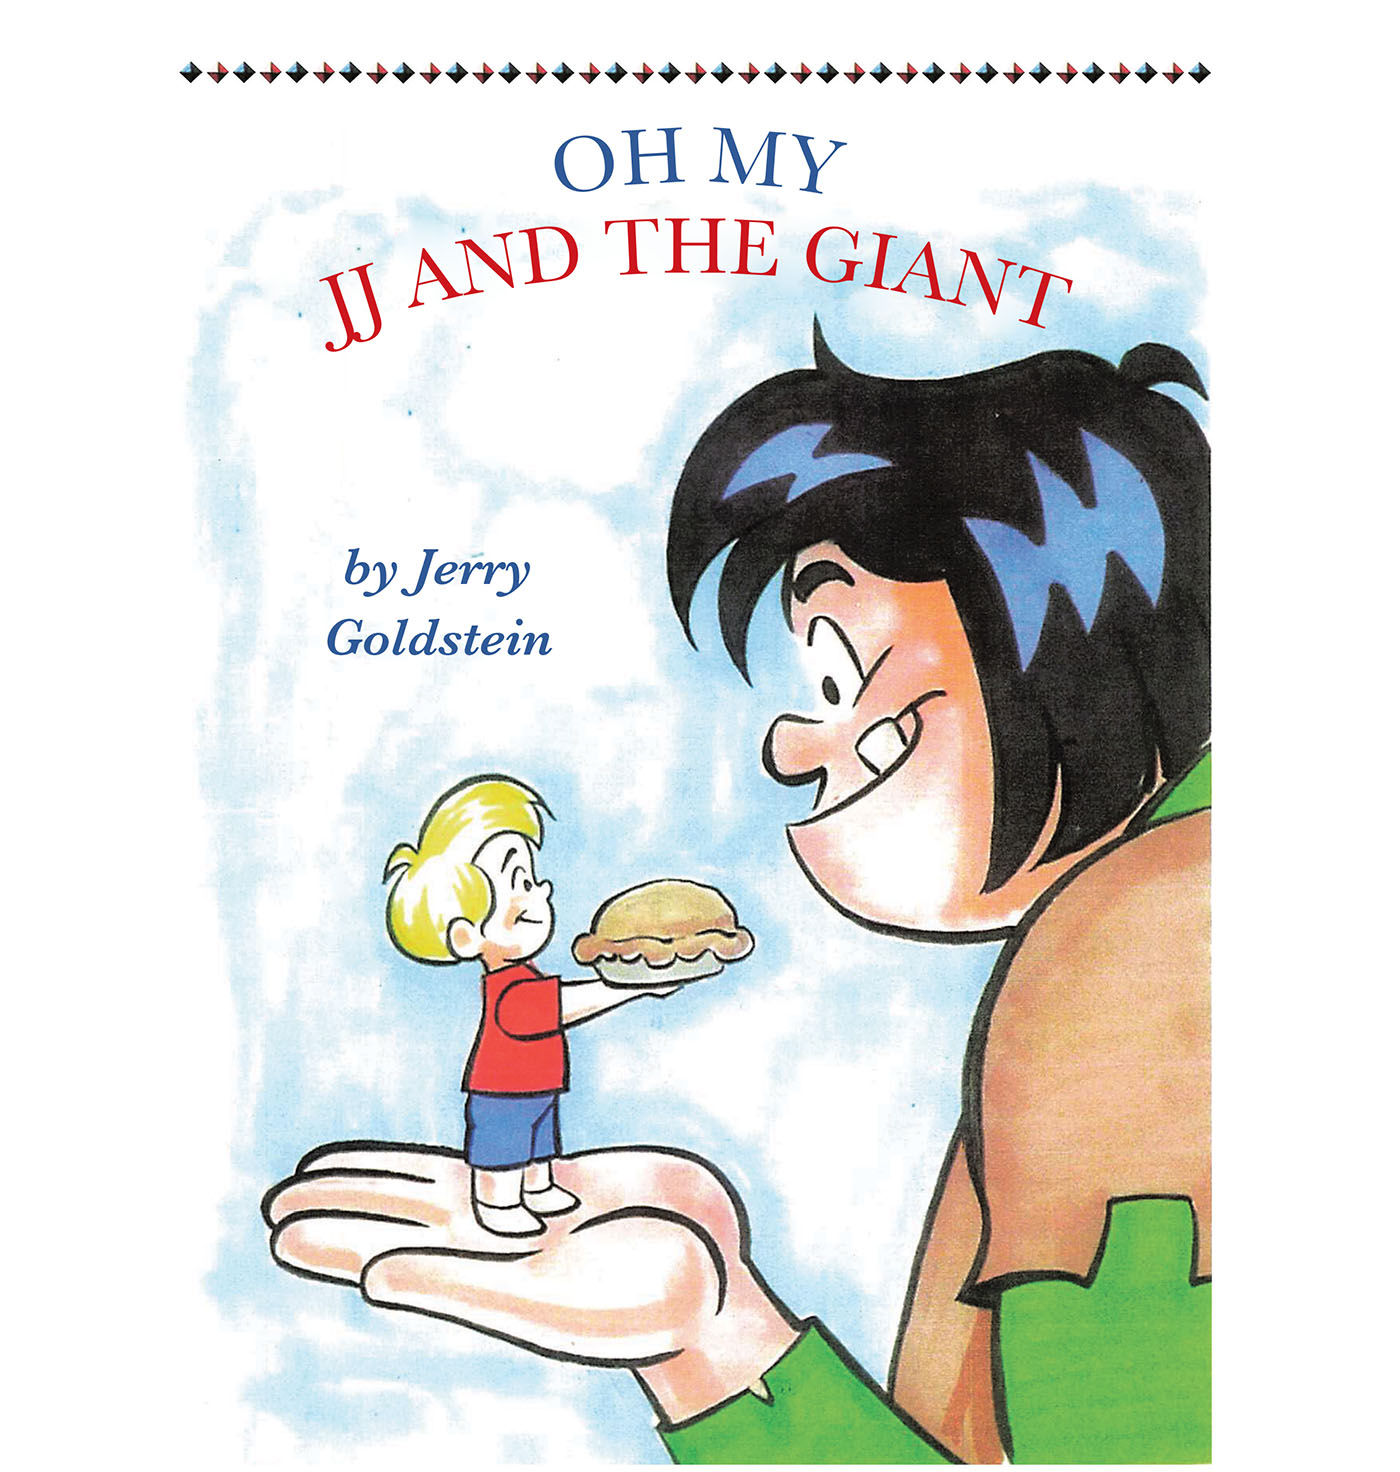 Author Jerry Goldstein’s New Book, “Oh My JJ and the Giant and Pies in the Sky,” is a Sweetly Fantastical Story of Determination and Courage for Young Readers